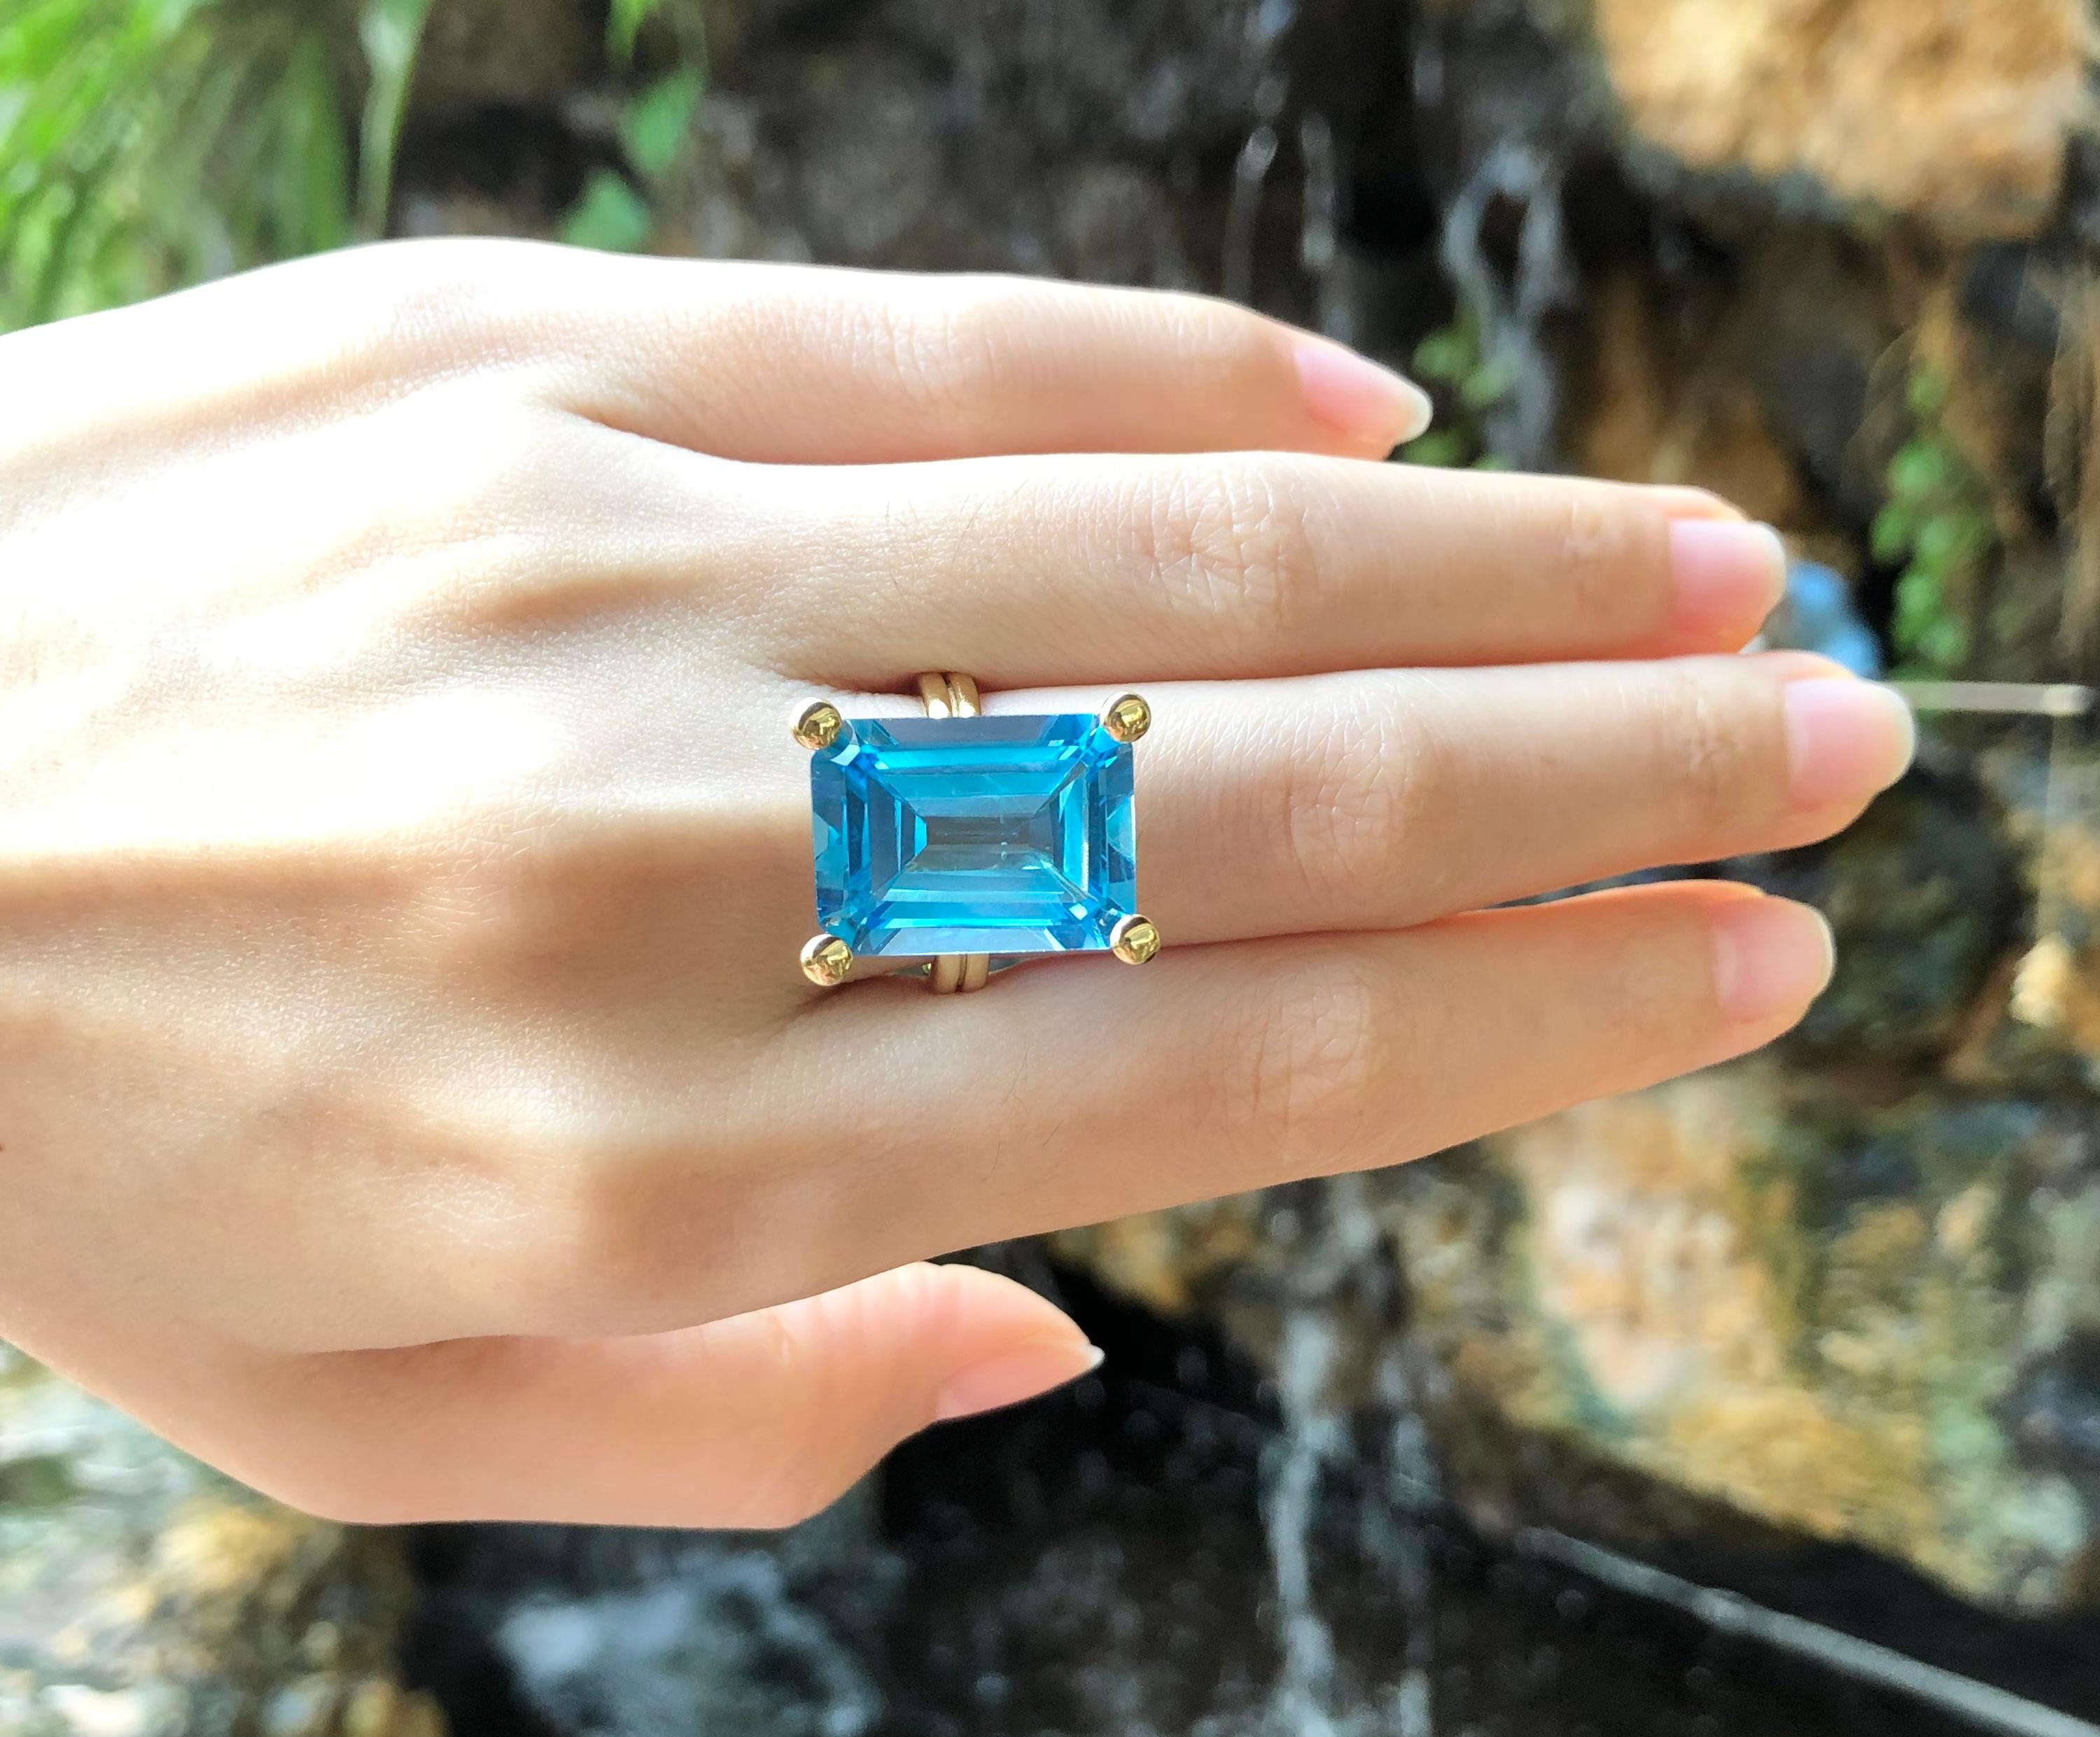 Blue Topaz 18.50 carats Ring set in 18 Karat Gold Settings

Width:  1.5 cm 
Length: 1.9 cm
Ring Size: 53
Total Weight: 11.19 grams


